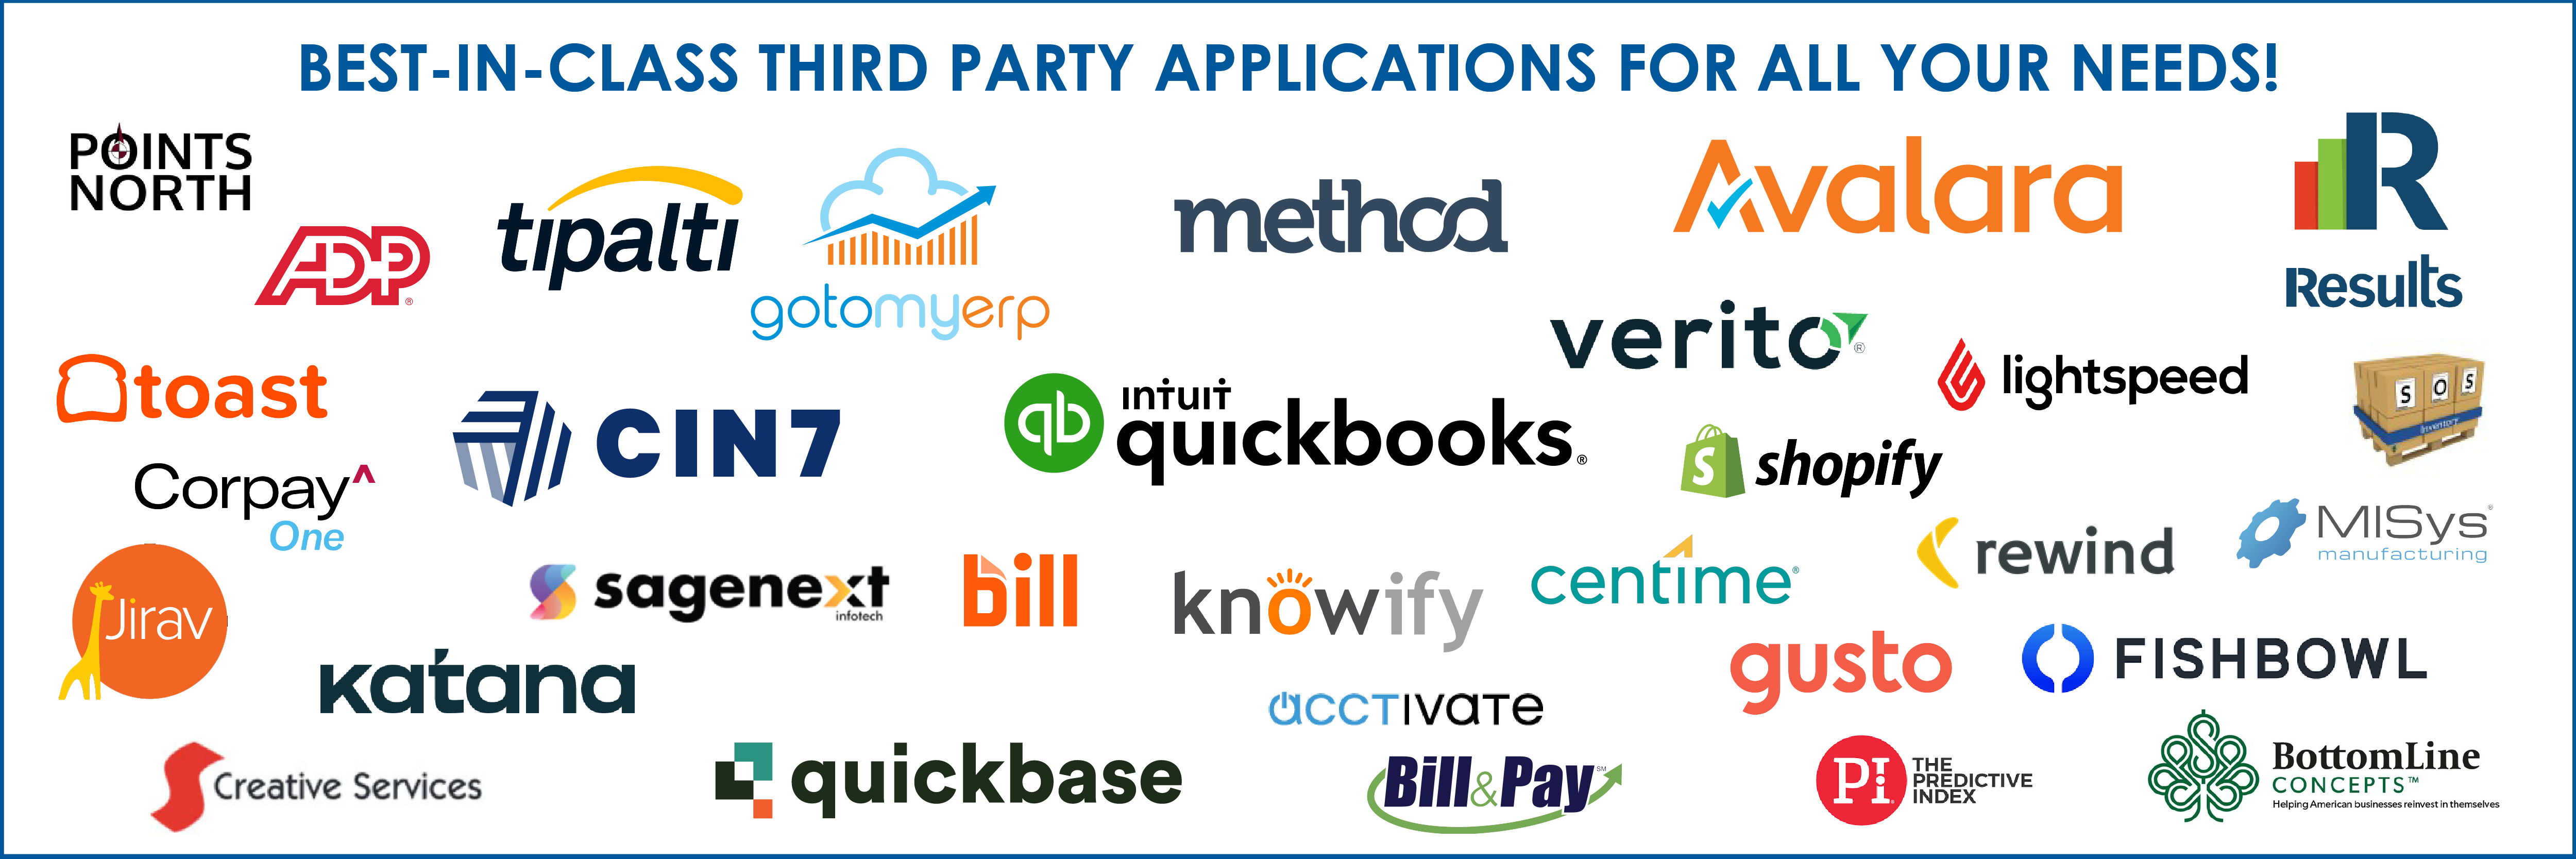 Third Party Applications-VARC